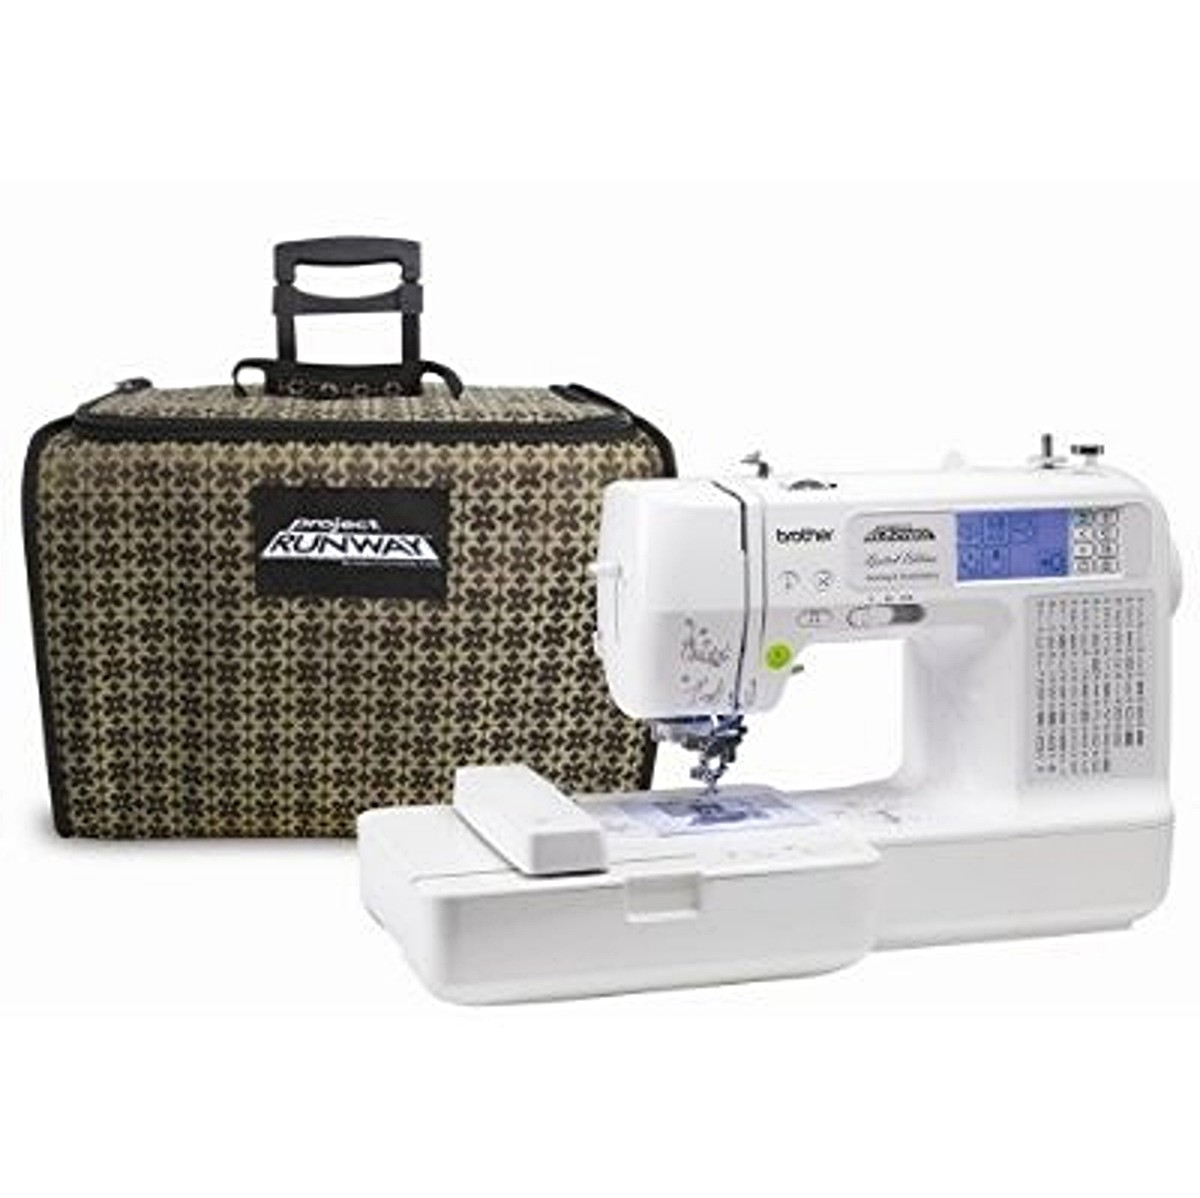 Brother Se400 Embroidery Patterns Compare The Brother Se 350 Se 400 Lb6770prw And Lb6800prw Sewing